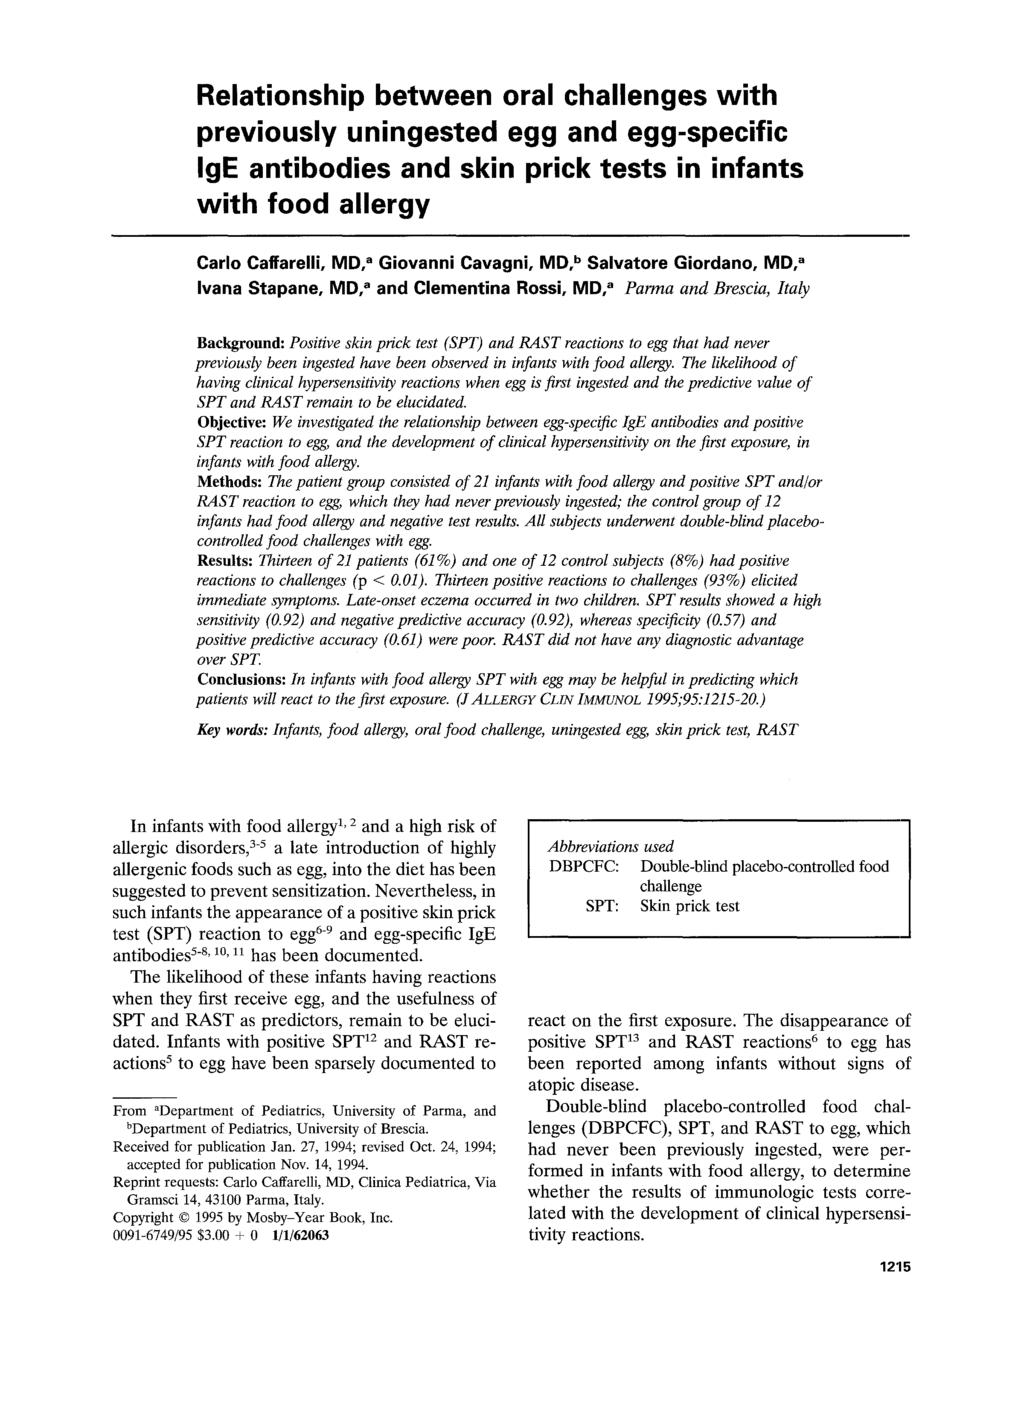 Relationship between oral challenges with previously uningested egg and egg-specific IgE antibodies and skin prick tests in infants with food allergy Carlo Caffarelli, MD, a Giovanni Cavagni, MD, b